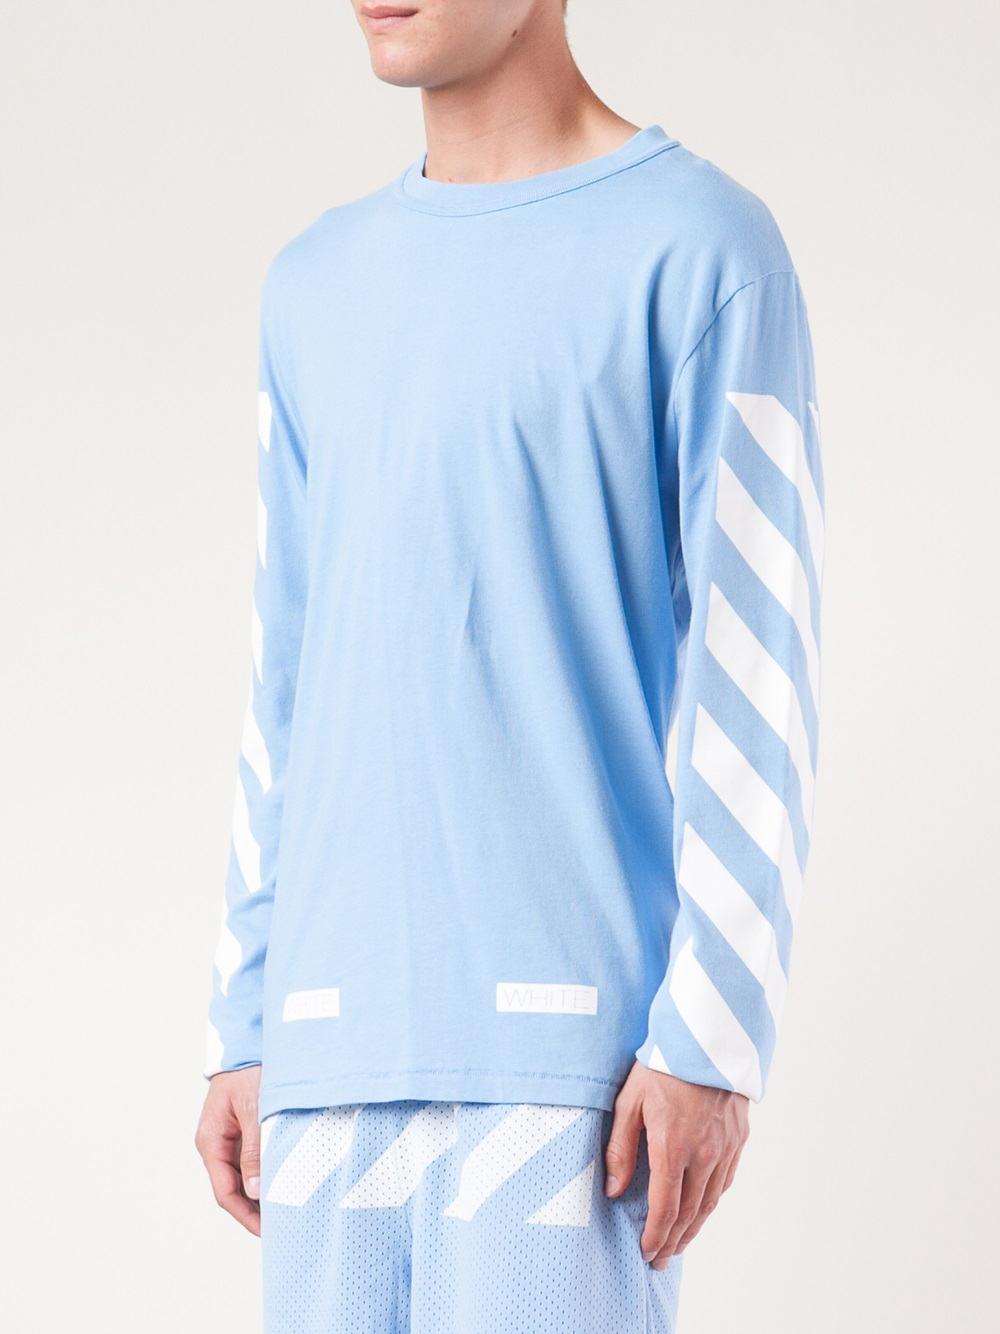 Off-White c/o Virgil Abloh Striped Sleeve T-Shirt in Blue ...